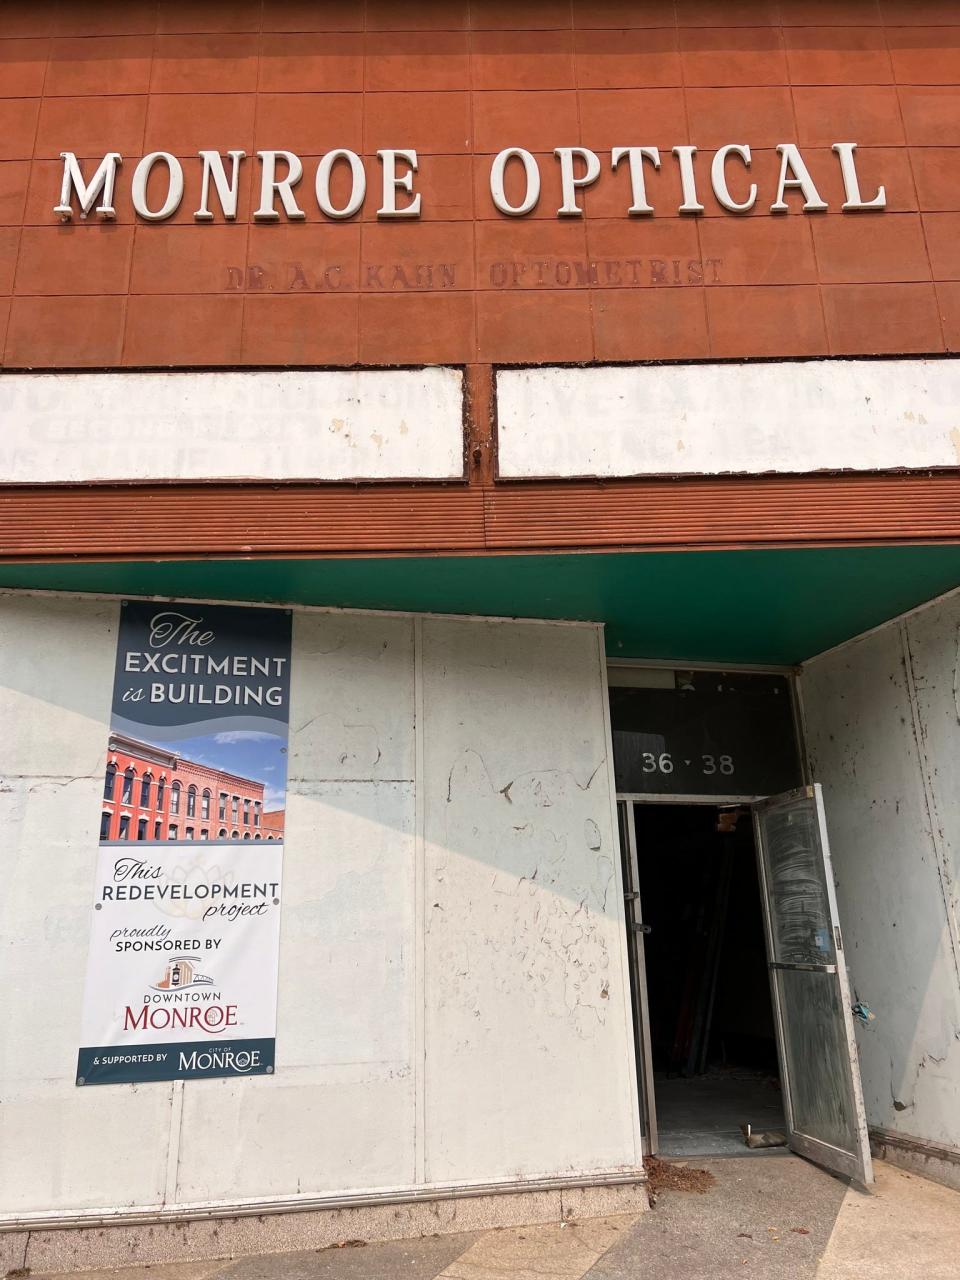 The old Monroe Optical Building with entrances at 36-38 S. Monroe St. and 13 W. Front St. is under renovation after sitting vacant for decades. Monroe's Downtown Development Authority purchased the building for $90,000 in 2023 and expects to invest more than half a million to prepare the site for redevelopment.